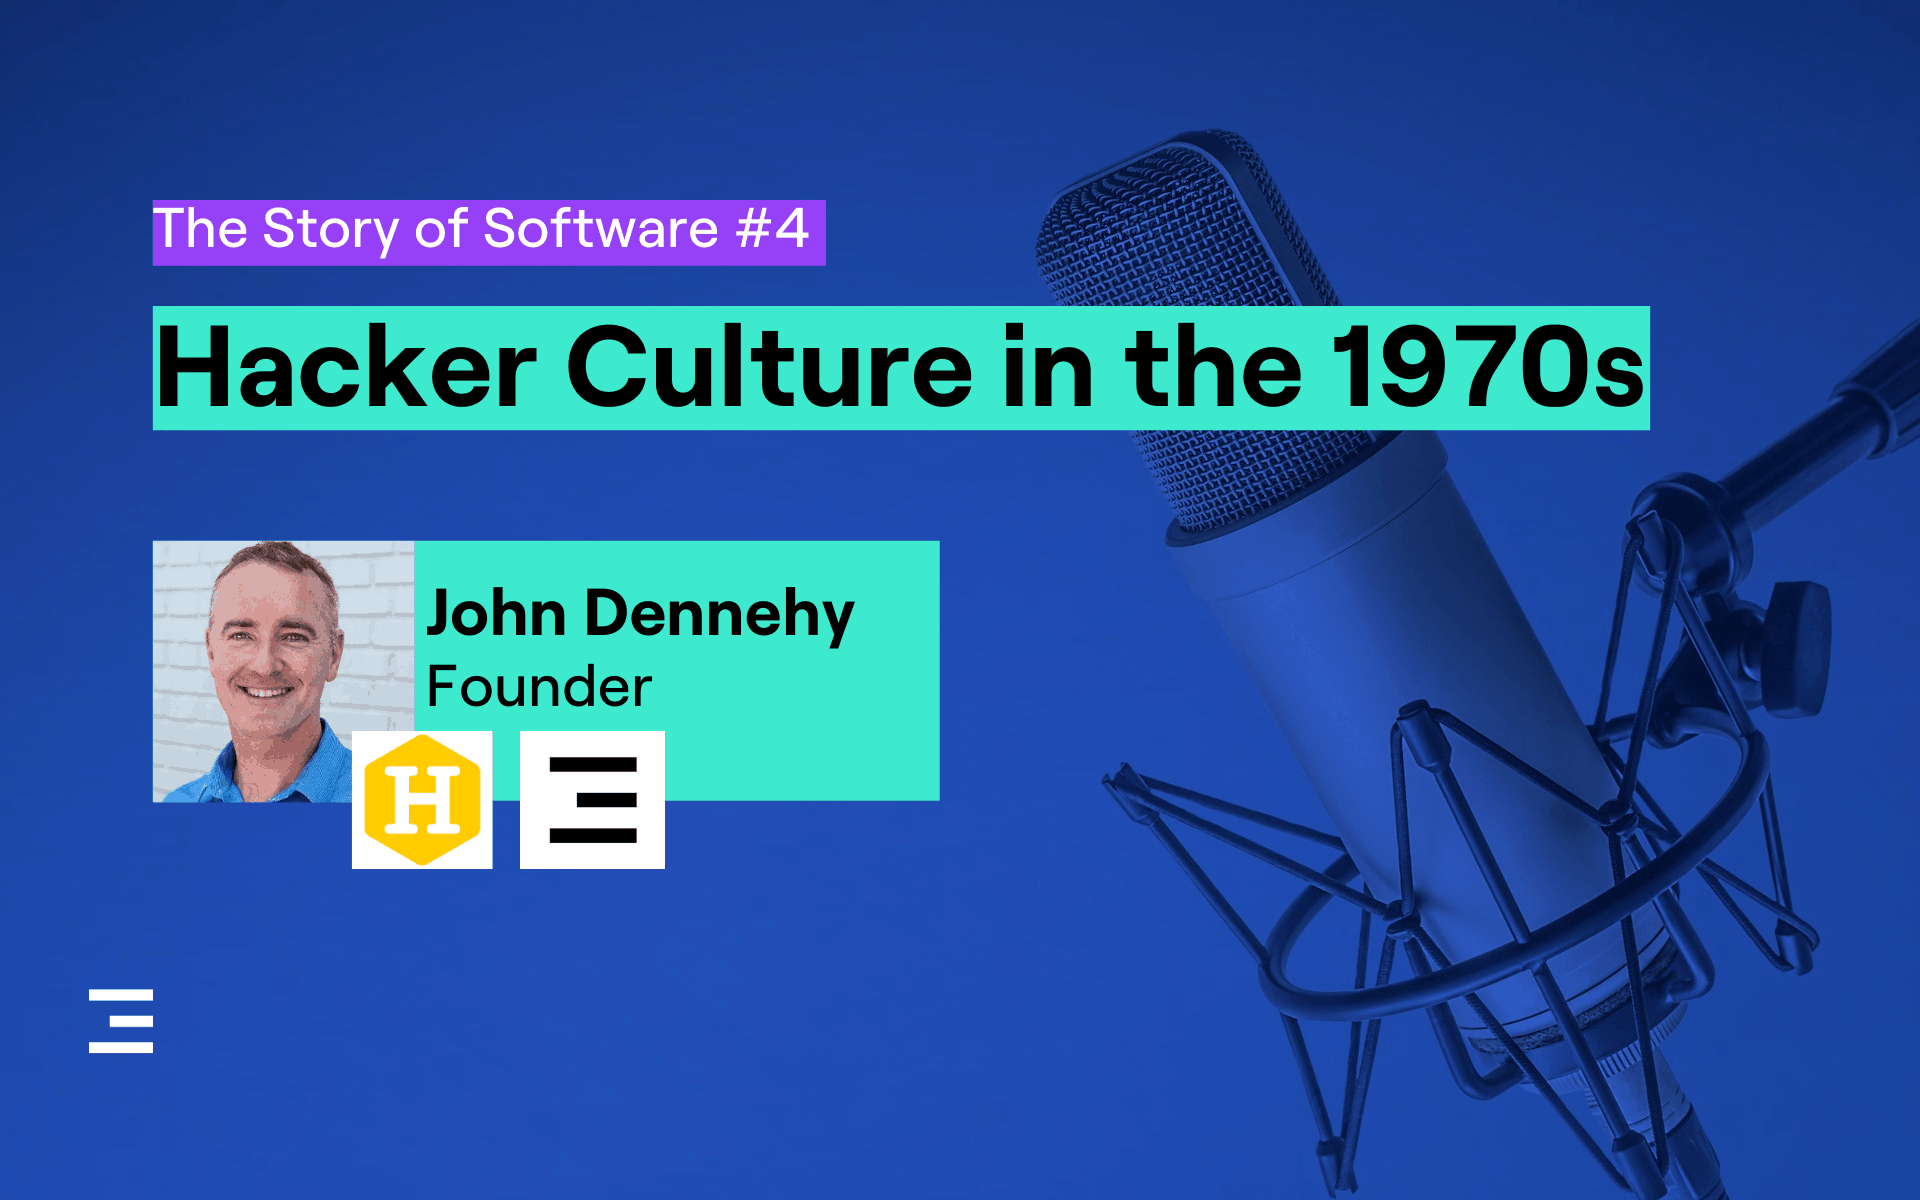 tech podcast on the story of software episode 4 - the hacker culture in the 70s